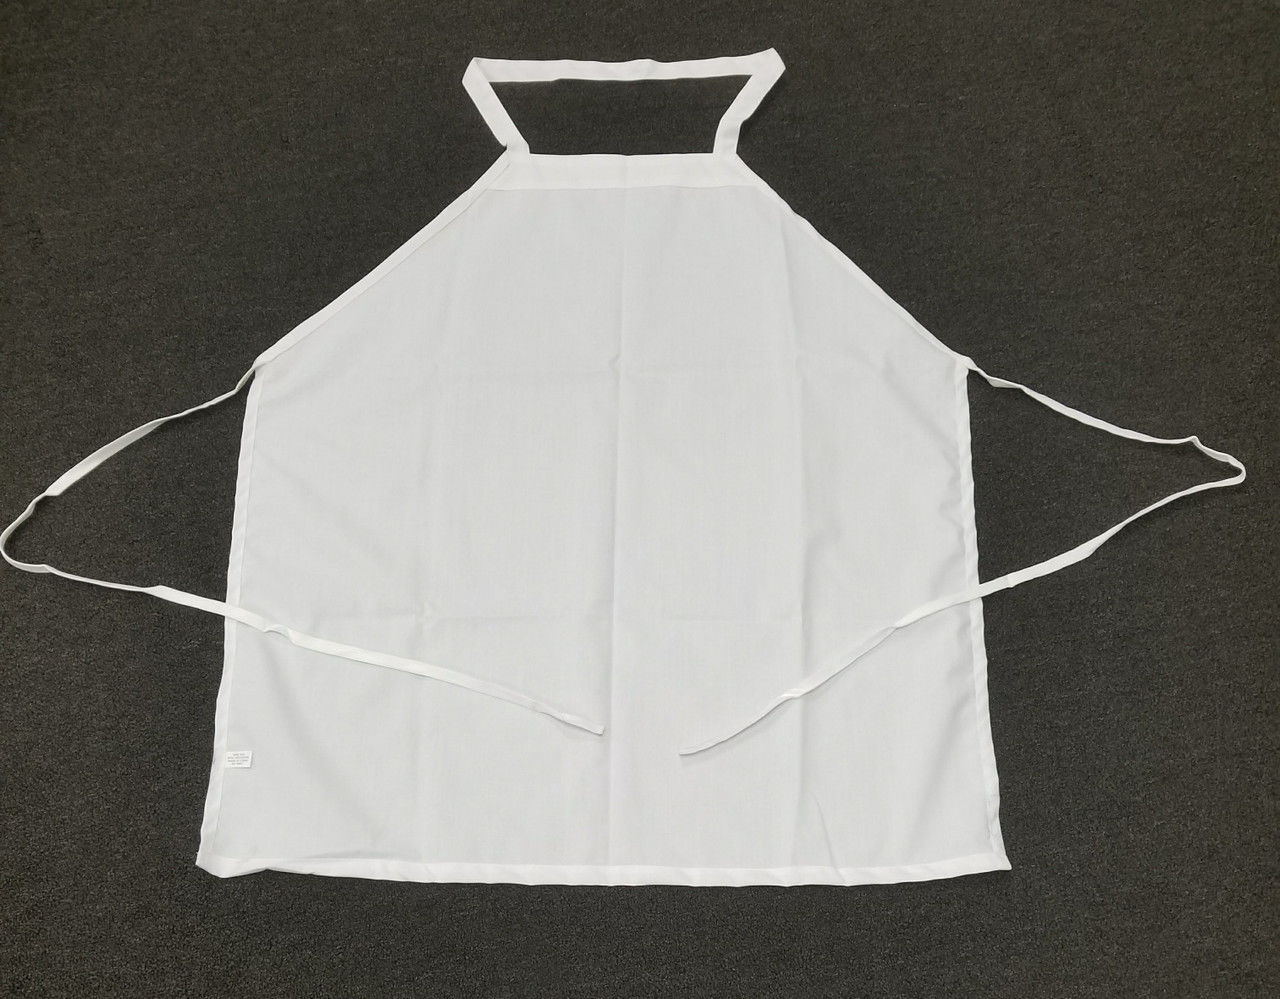 How long are the ties on these white bib aprons?